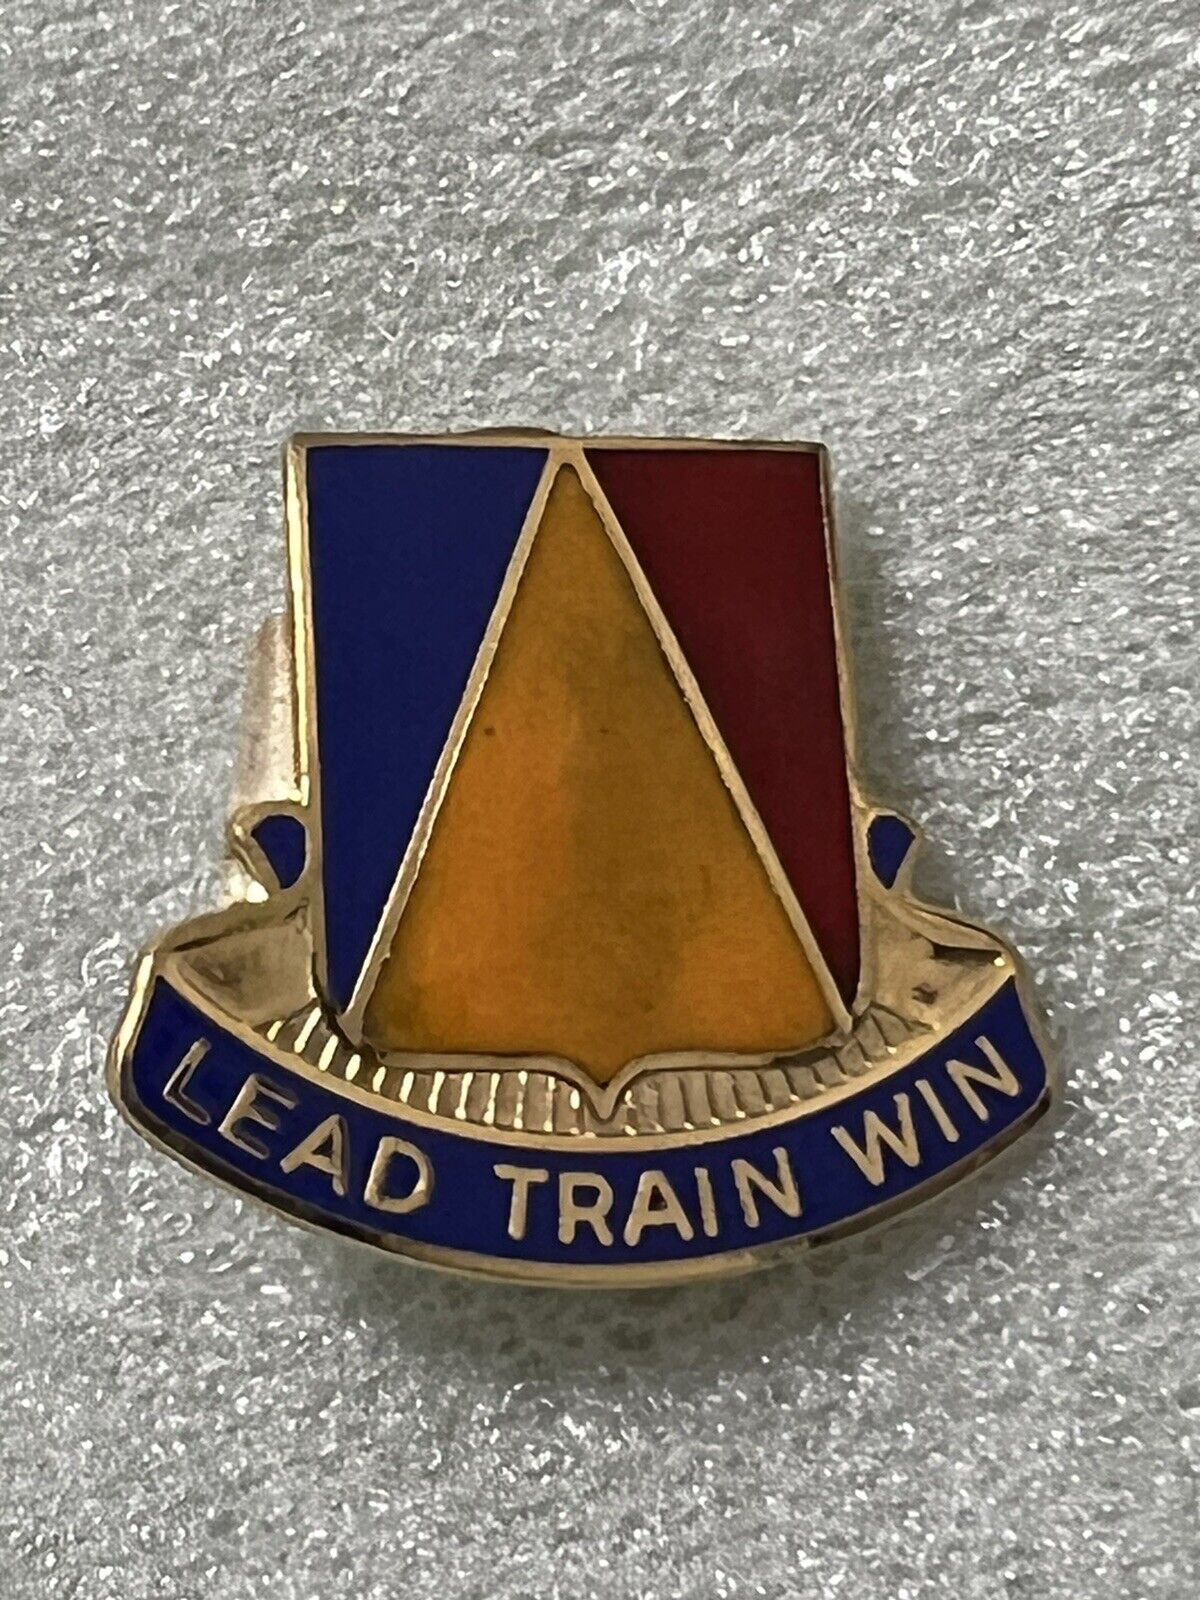 US Military DUI Unit Insignia Pin Army National Training Center Lead Train Win